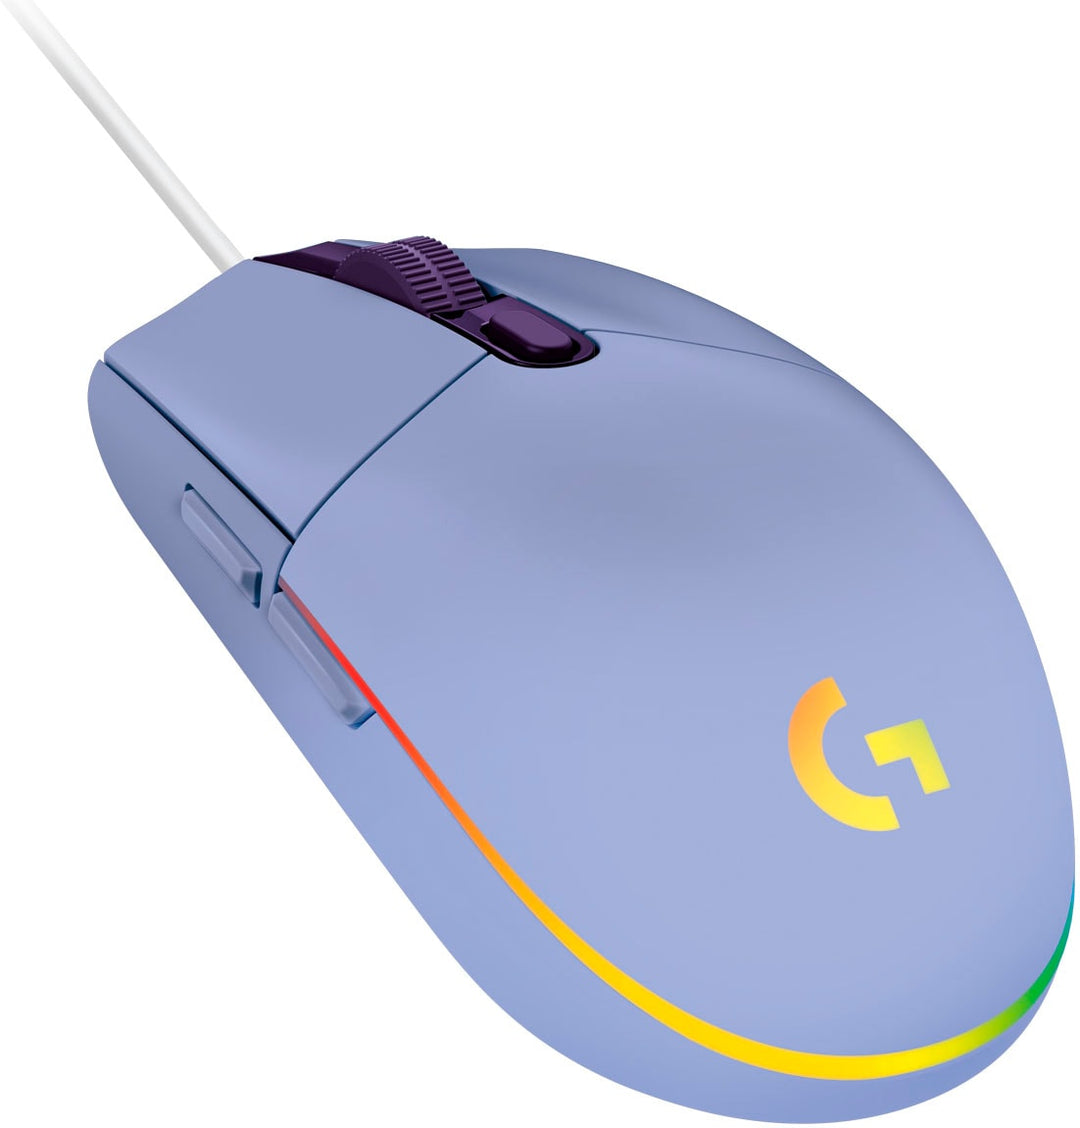 Logitech - G203 LIGHTSYNC Wired Optical Gaming Mouse with 8,000 DPI sensor - Lilac_0